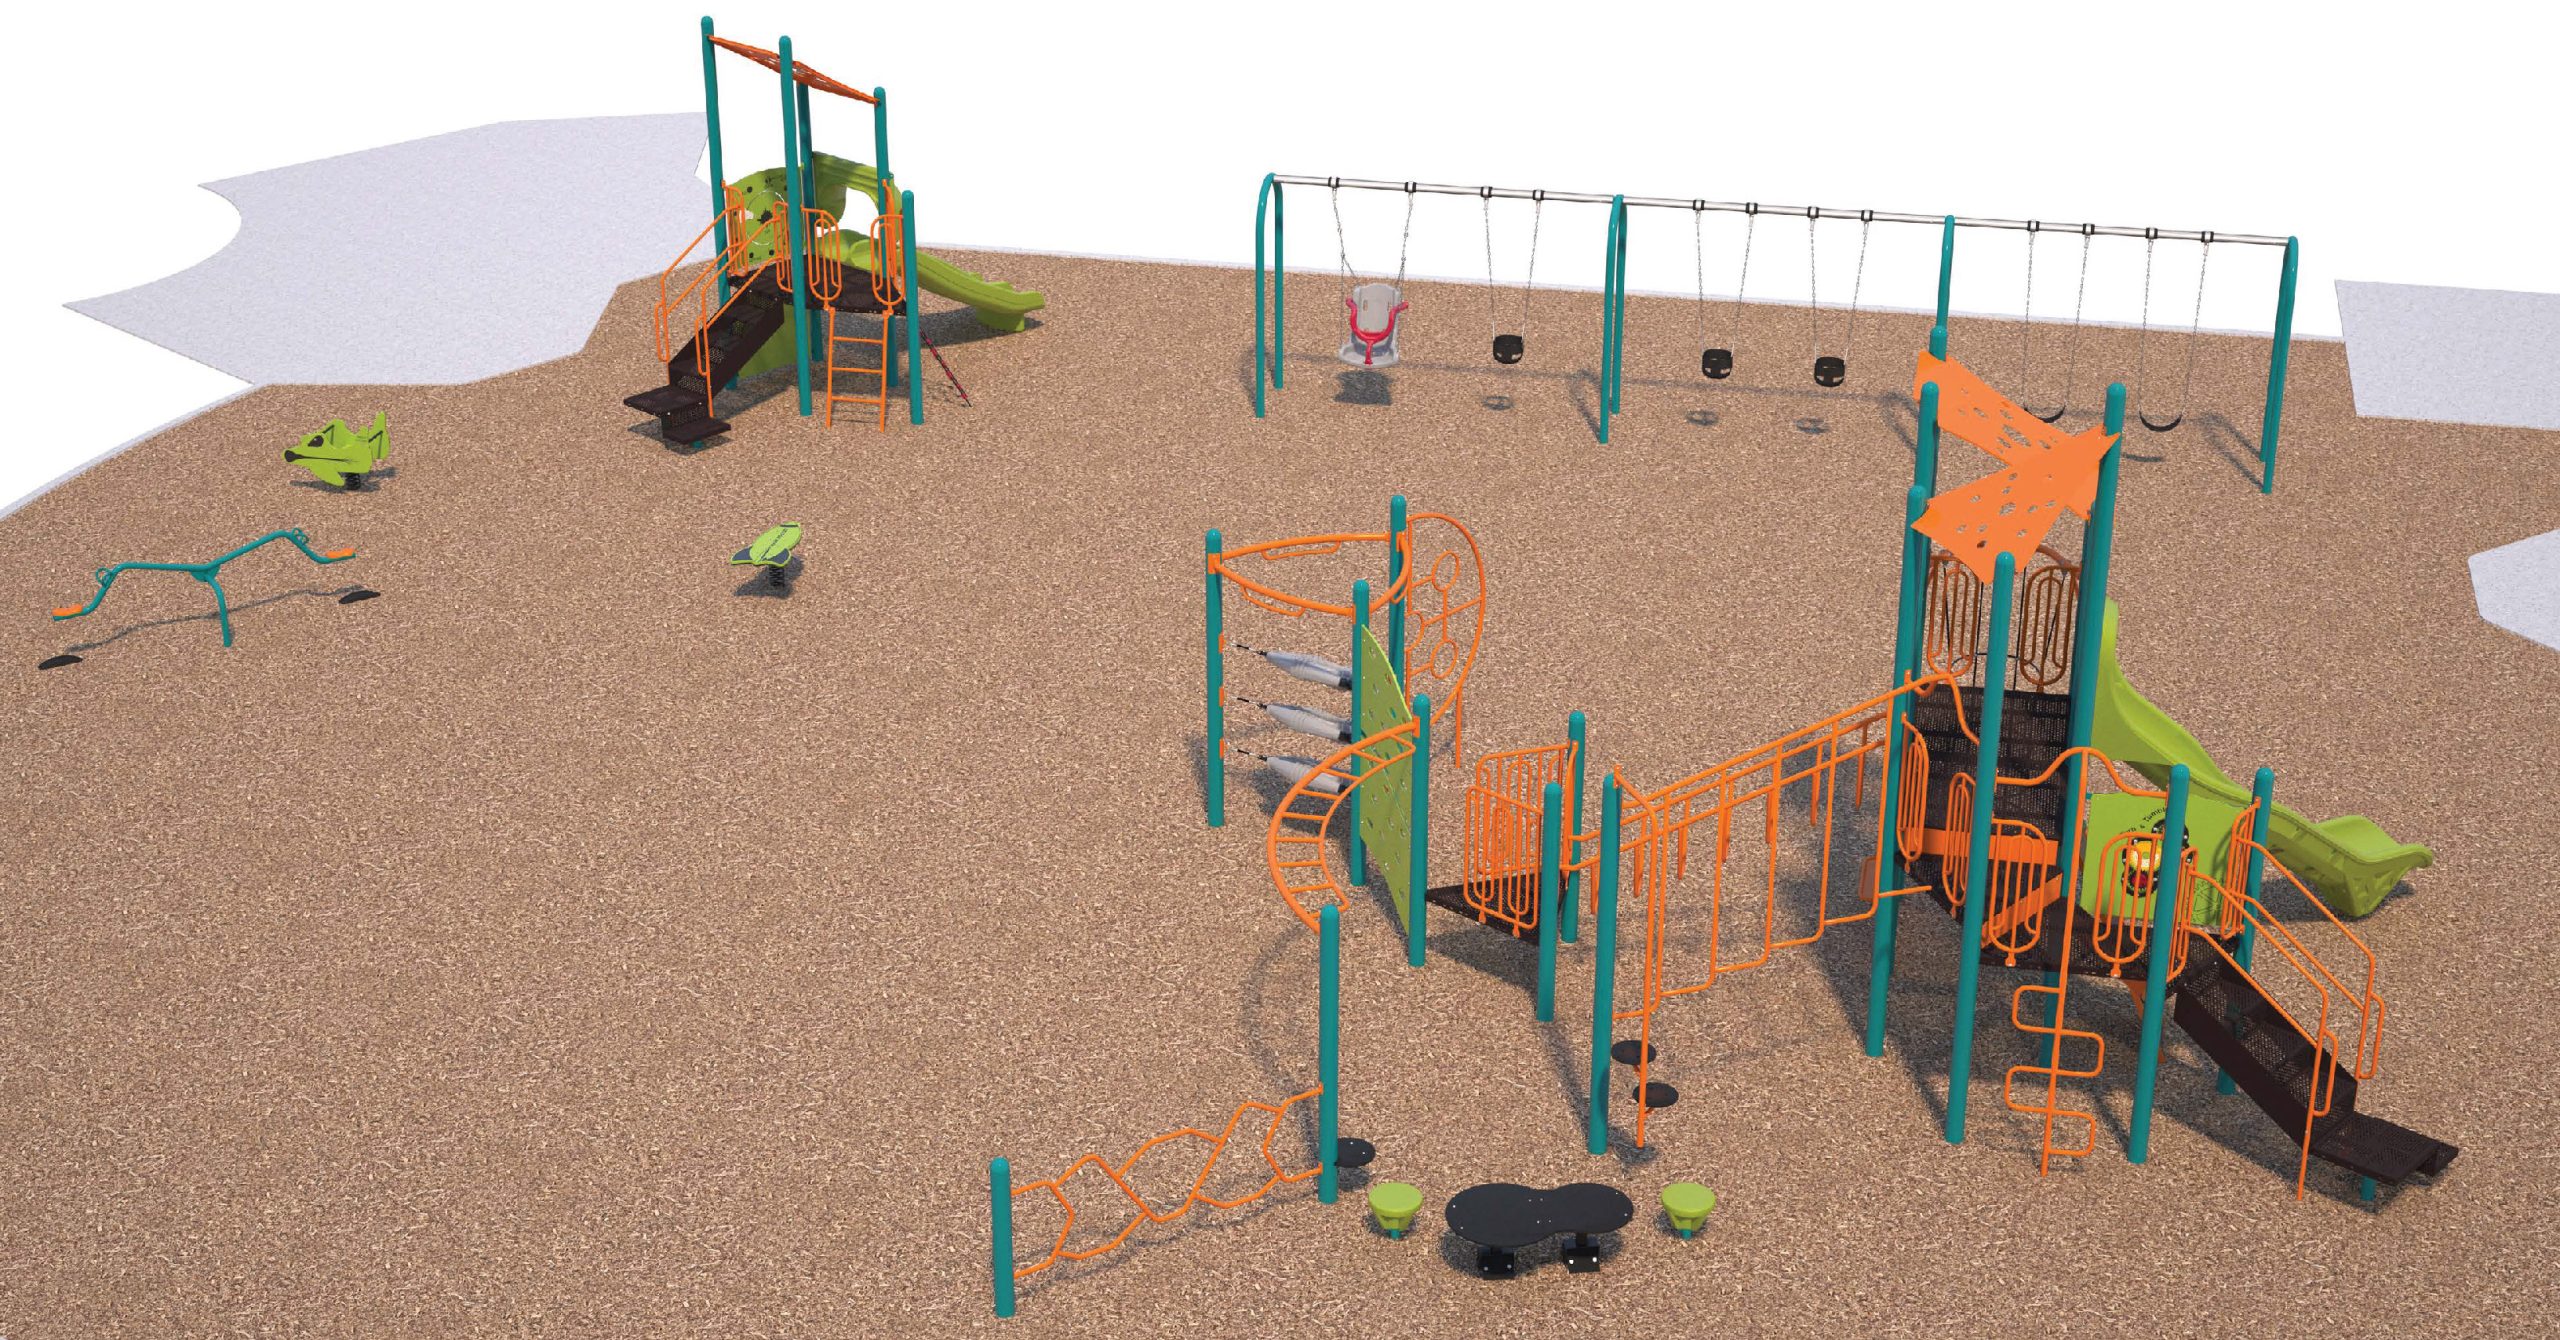 The final design for the new Perth Square Park Playground, which has been refined based on community feedback. It will be the following colours: Teal (posts), Orange accents, Gecko (roto-plastic) and Lime / Black (HDPE-plastic) and include the play features listed below.